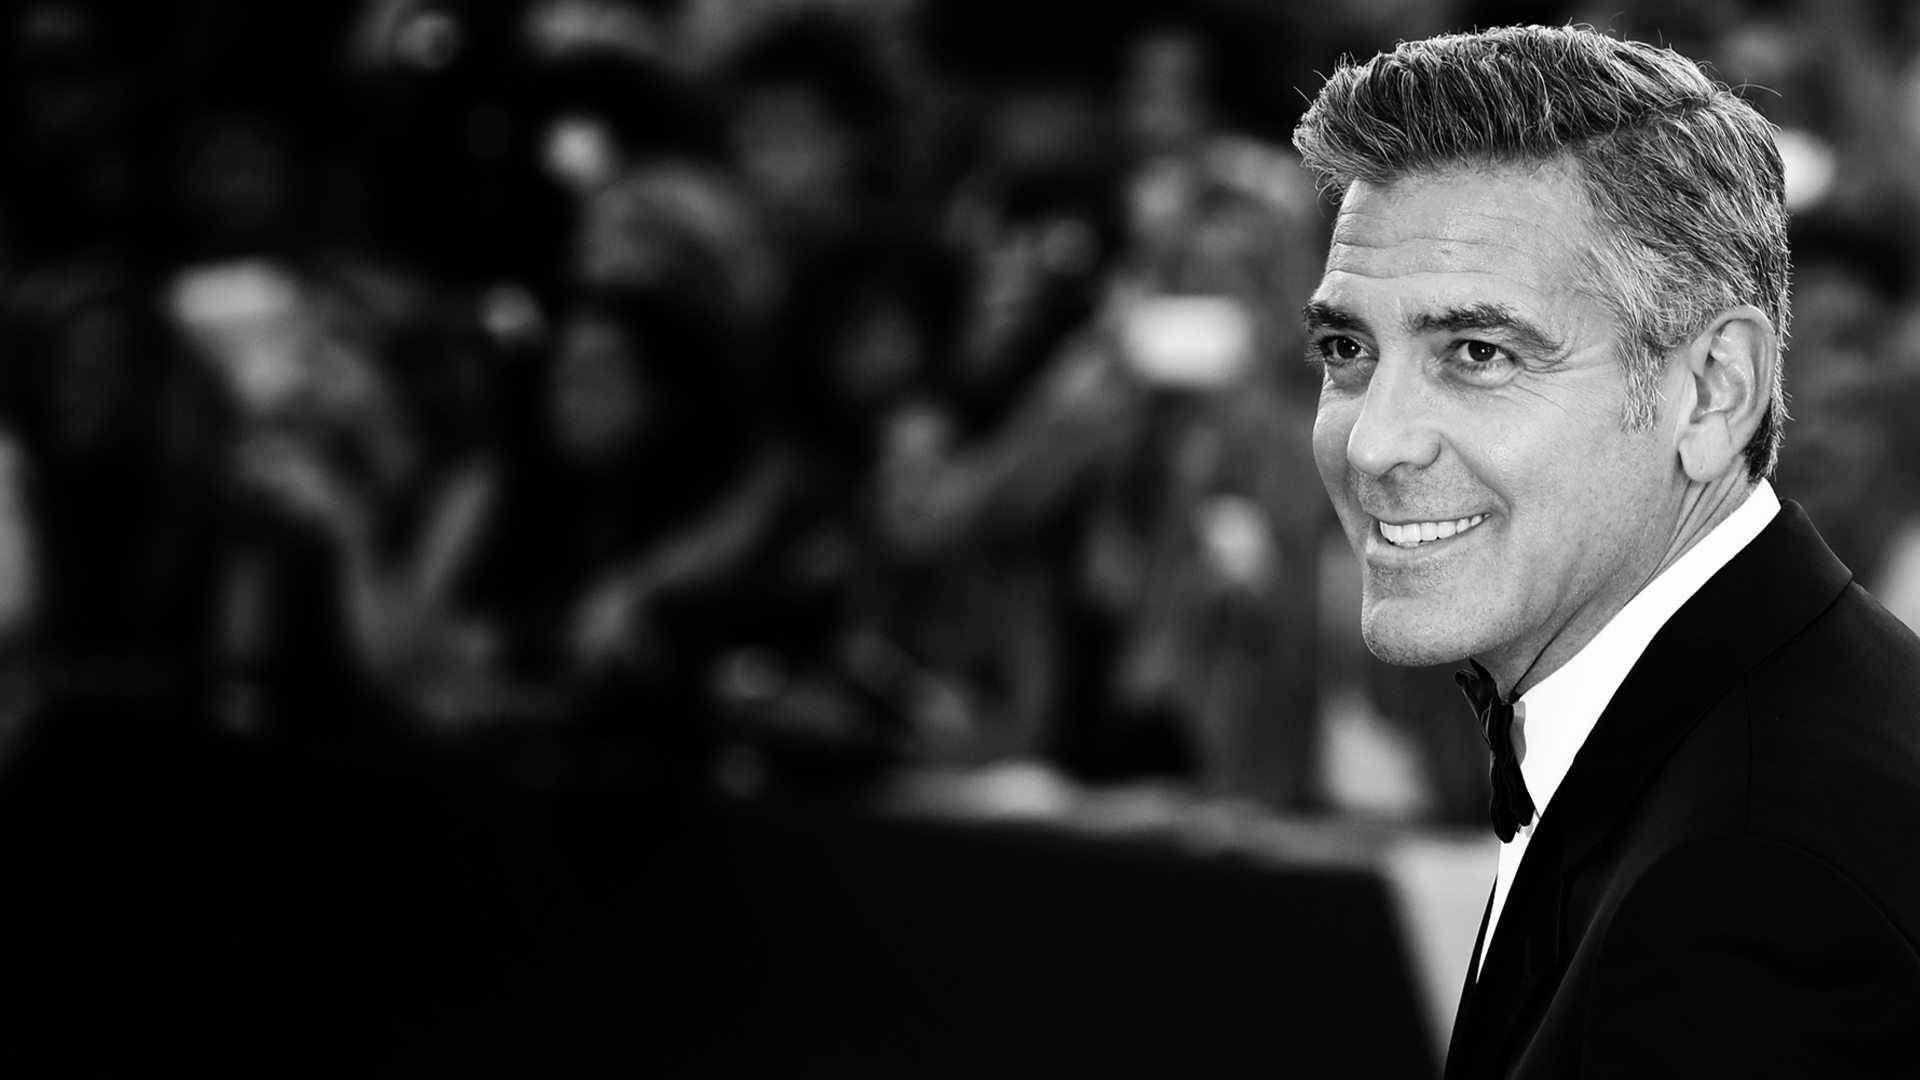 George Clooney And His Charming Smile Wallpaper